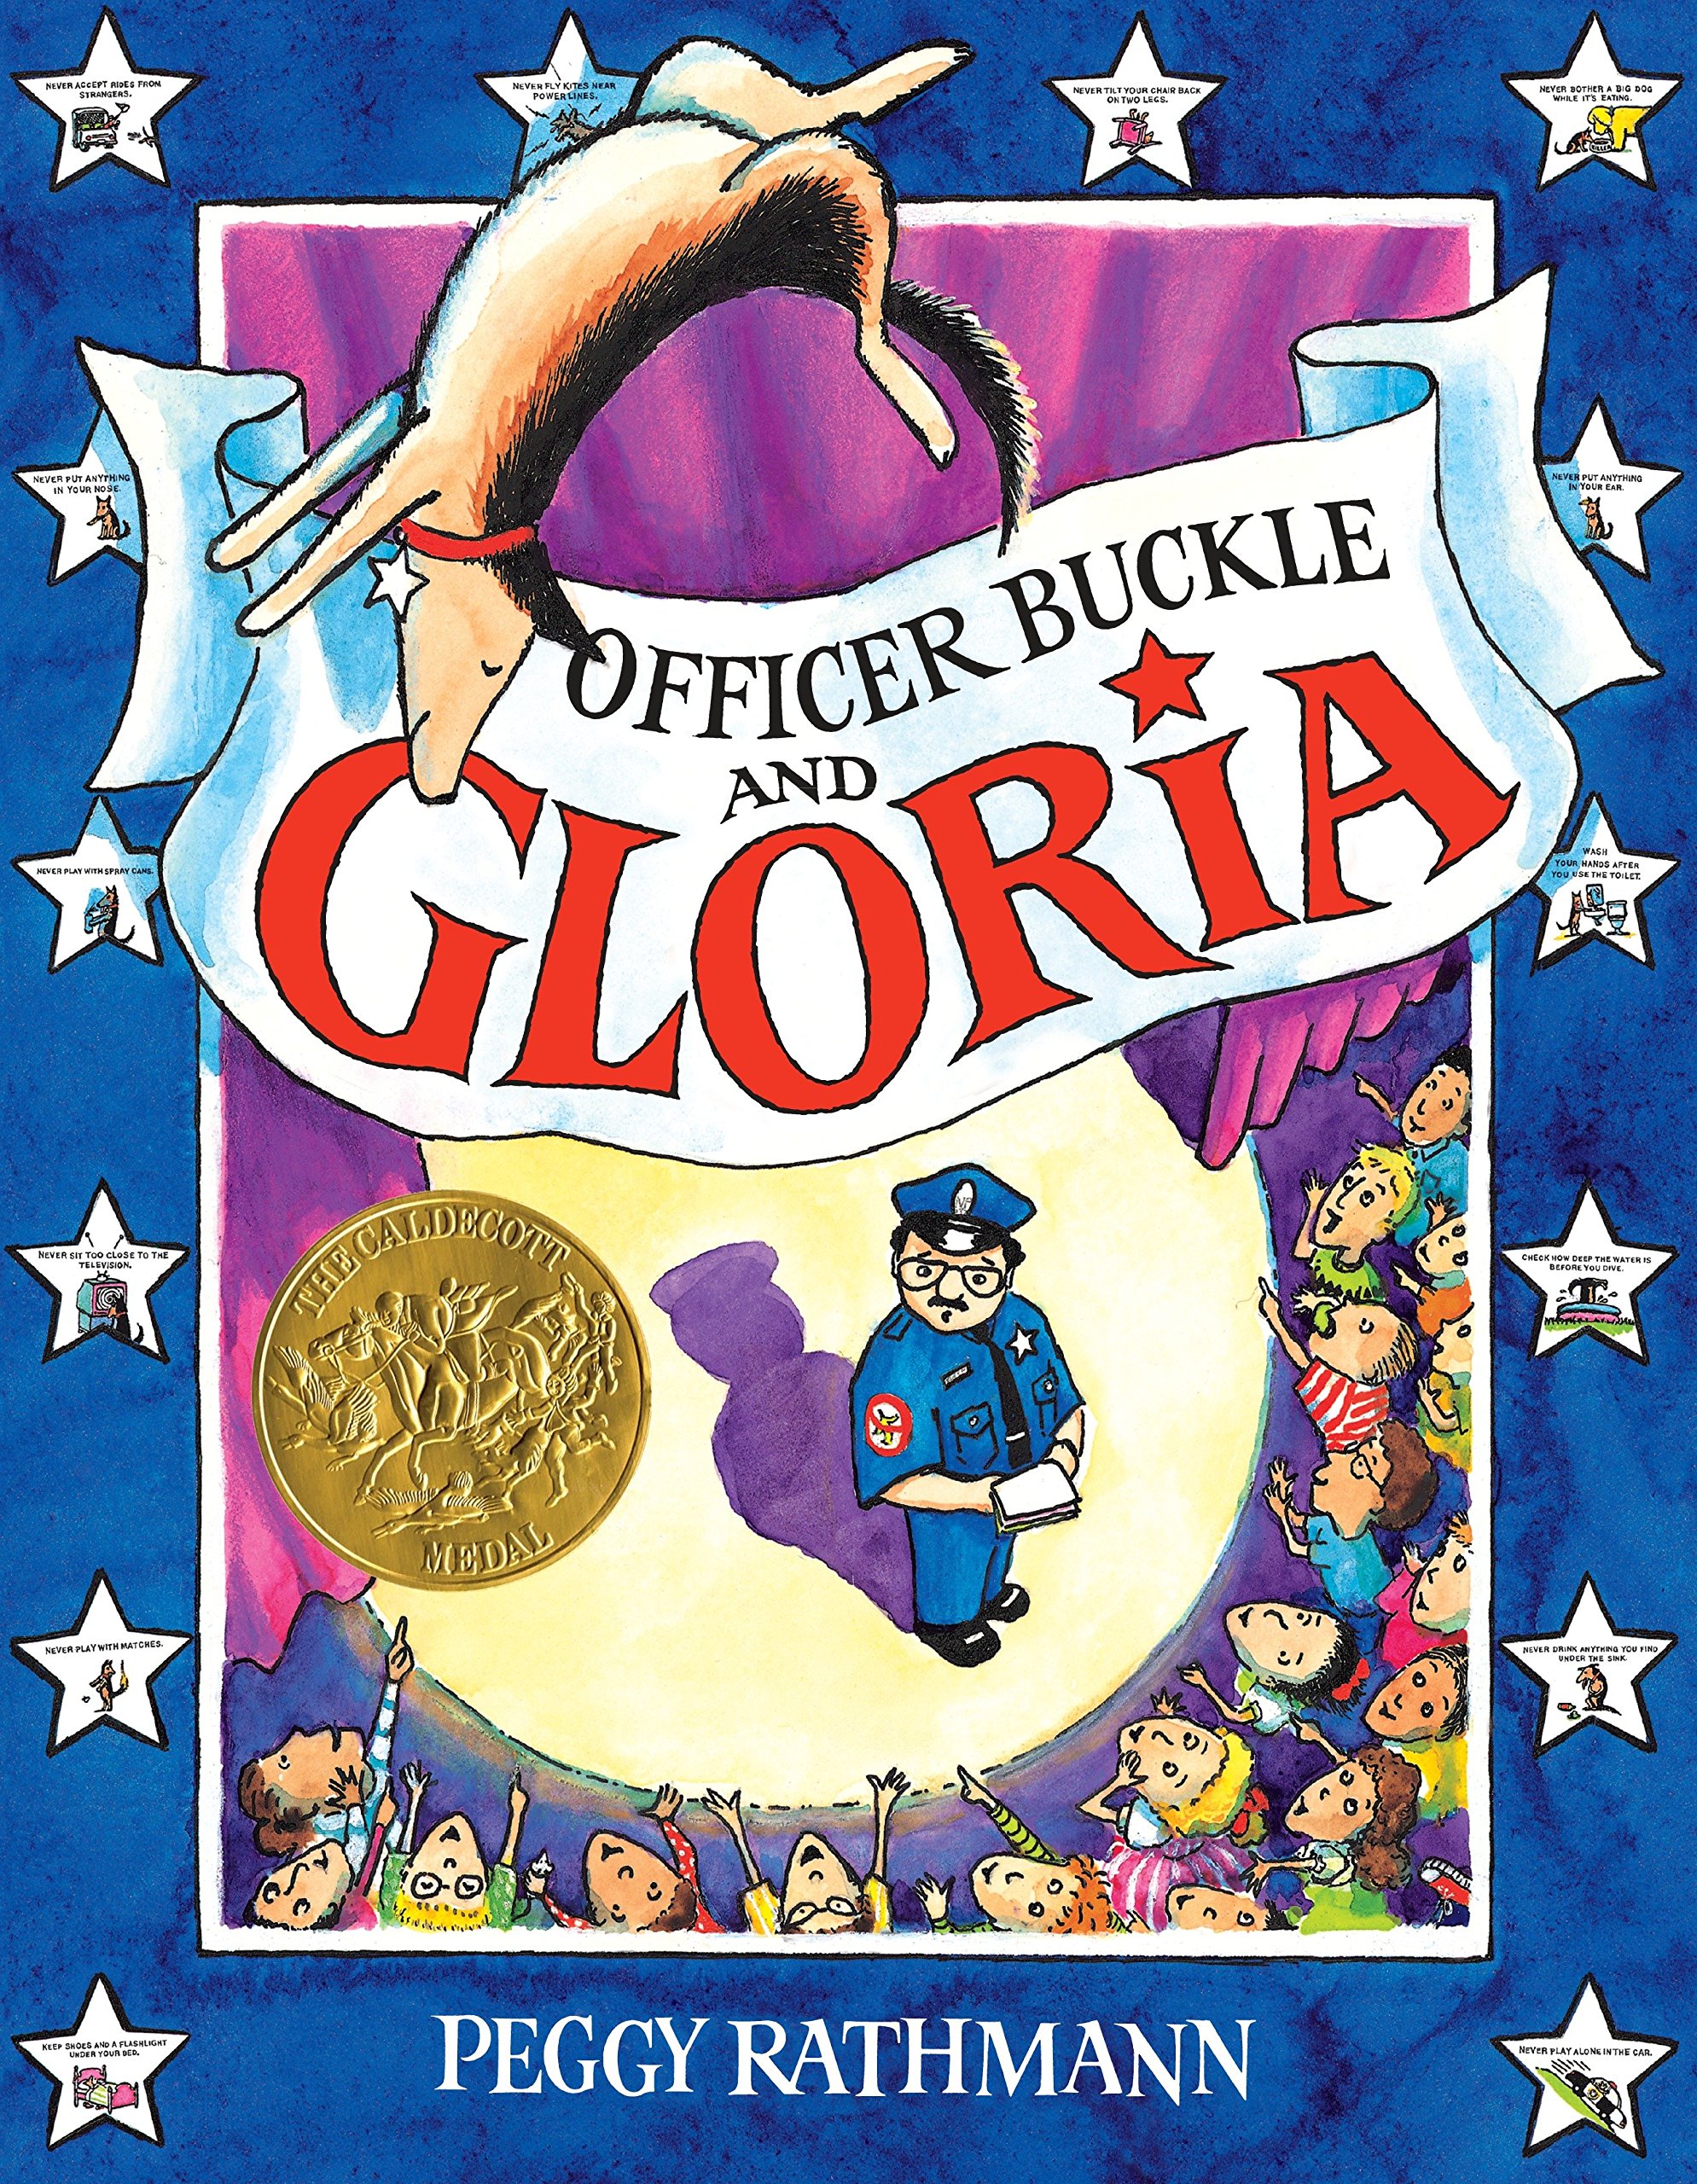 speech and language teaching concepts for Officer Buckle and Gloria in speech therapy​ ​